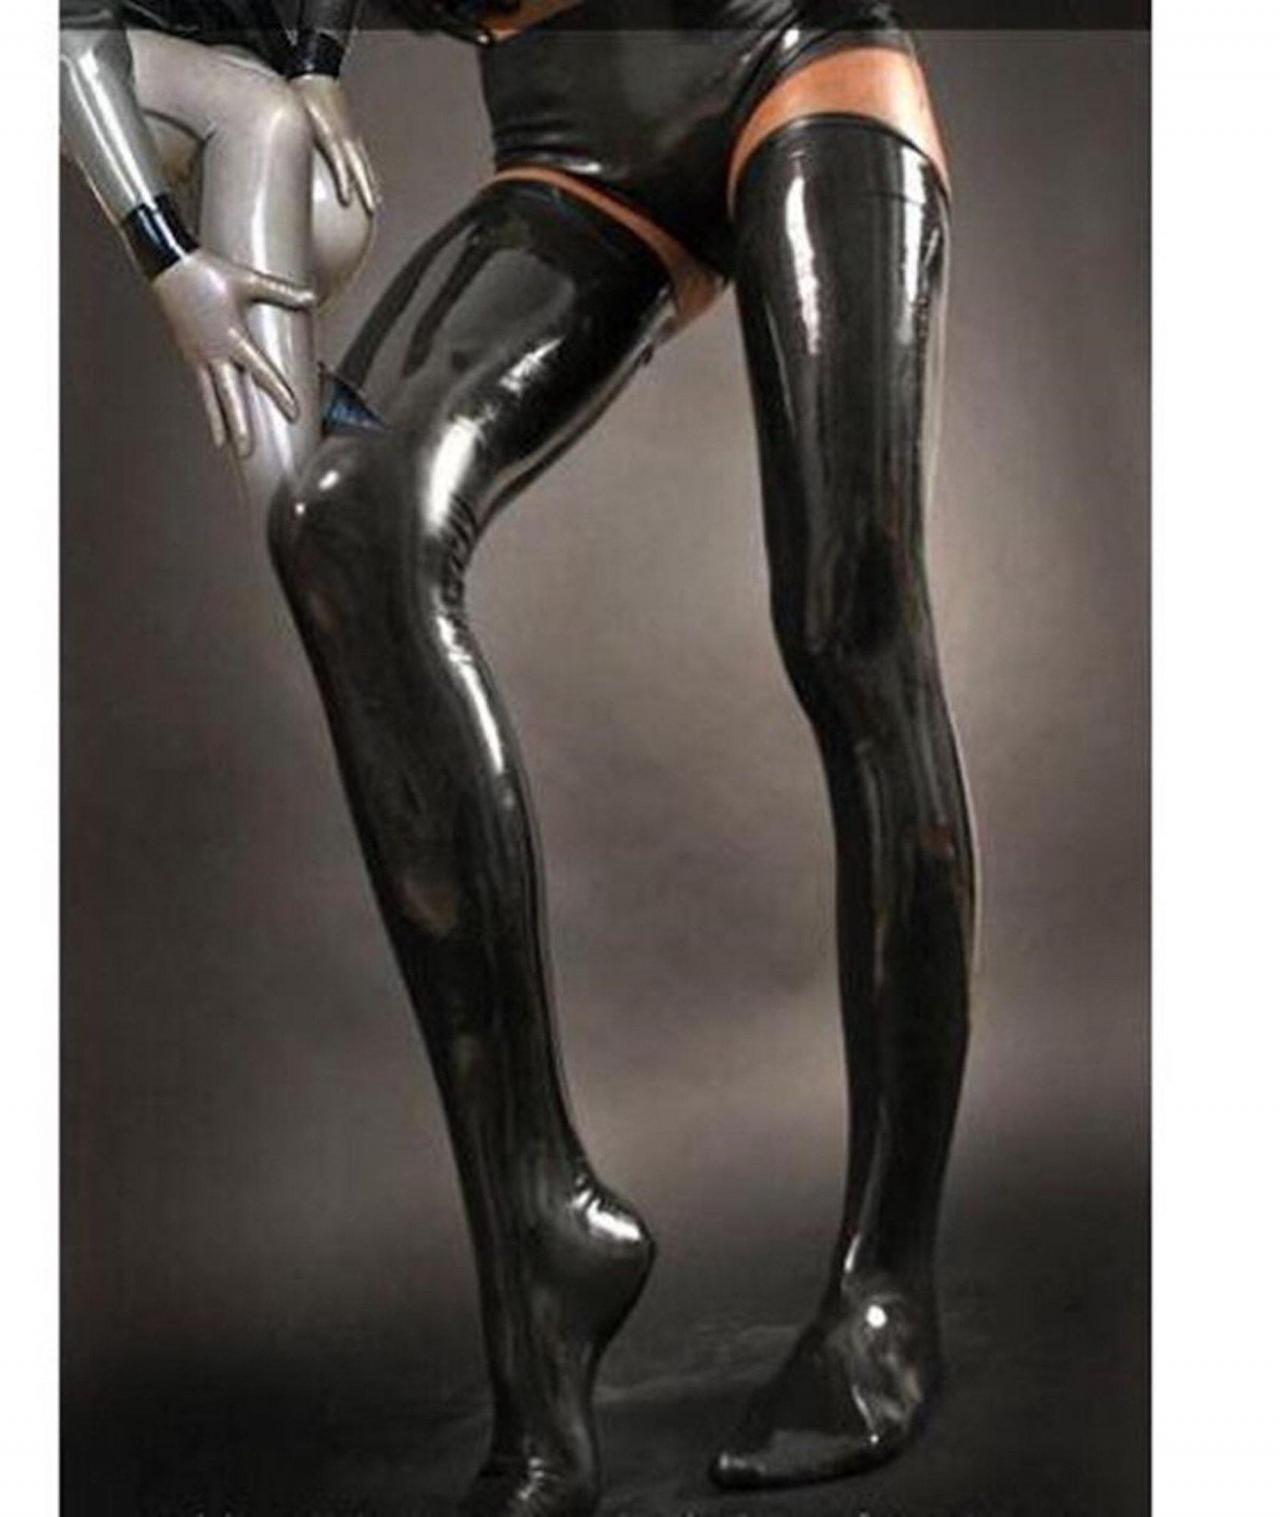 Shiny Latex Stockings For Women / Sexy 100% Latex Stockings For Fetishist Erotic Role Play / Leather Effect Rubber Stockings Cosplay Bdsm